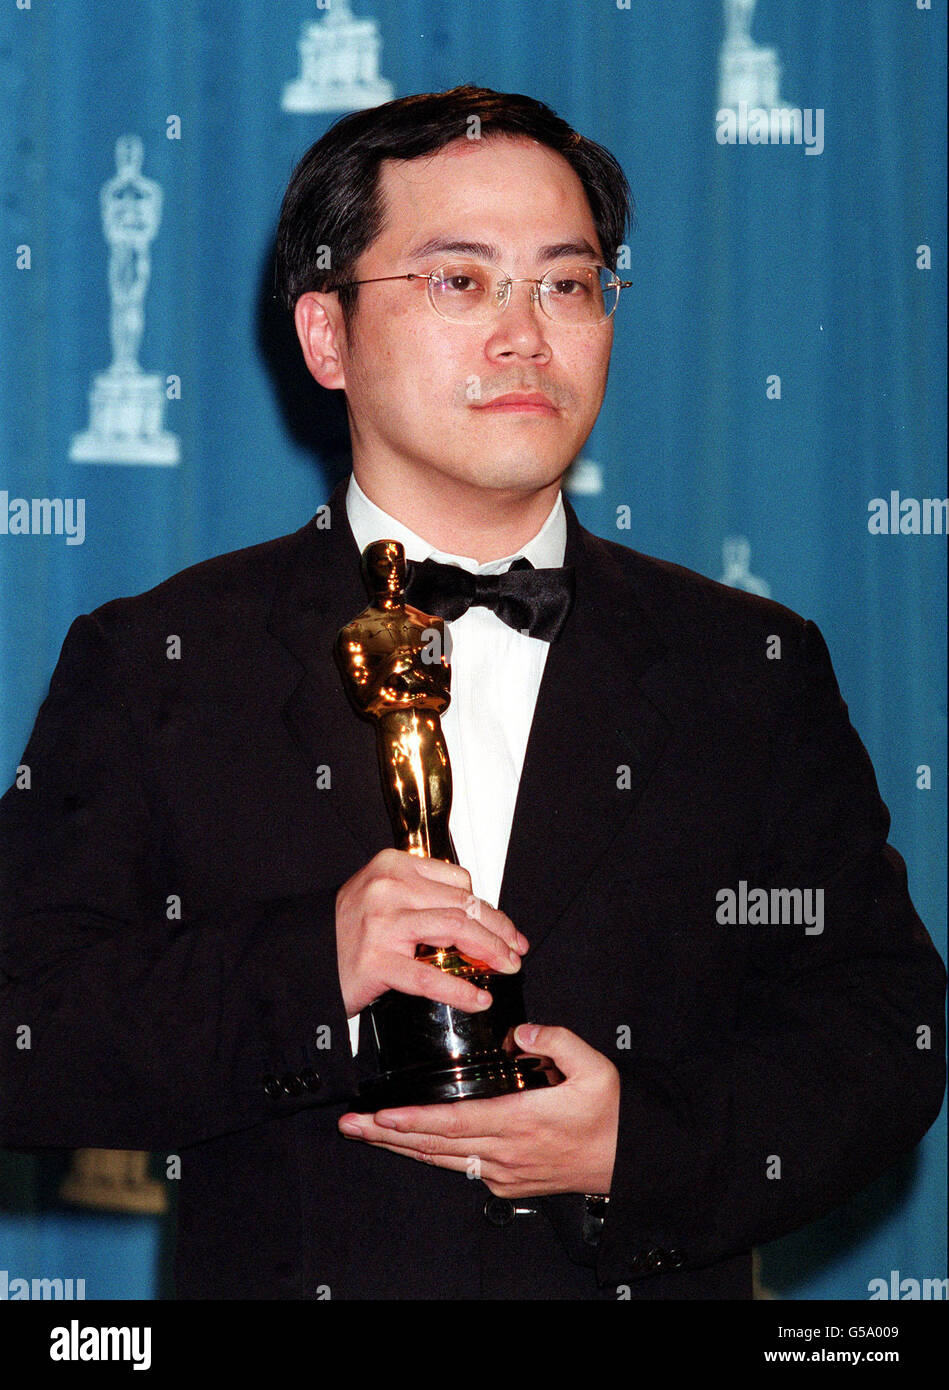 Tim Yip with his Oscar for Achievement in Art Direction at the 73rd Annual Academy Awards, held at the Shrine Auditorium in Los Angeles. Stock Photo